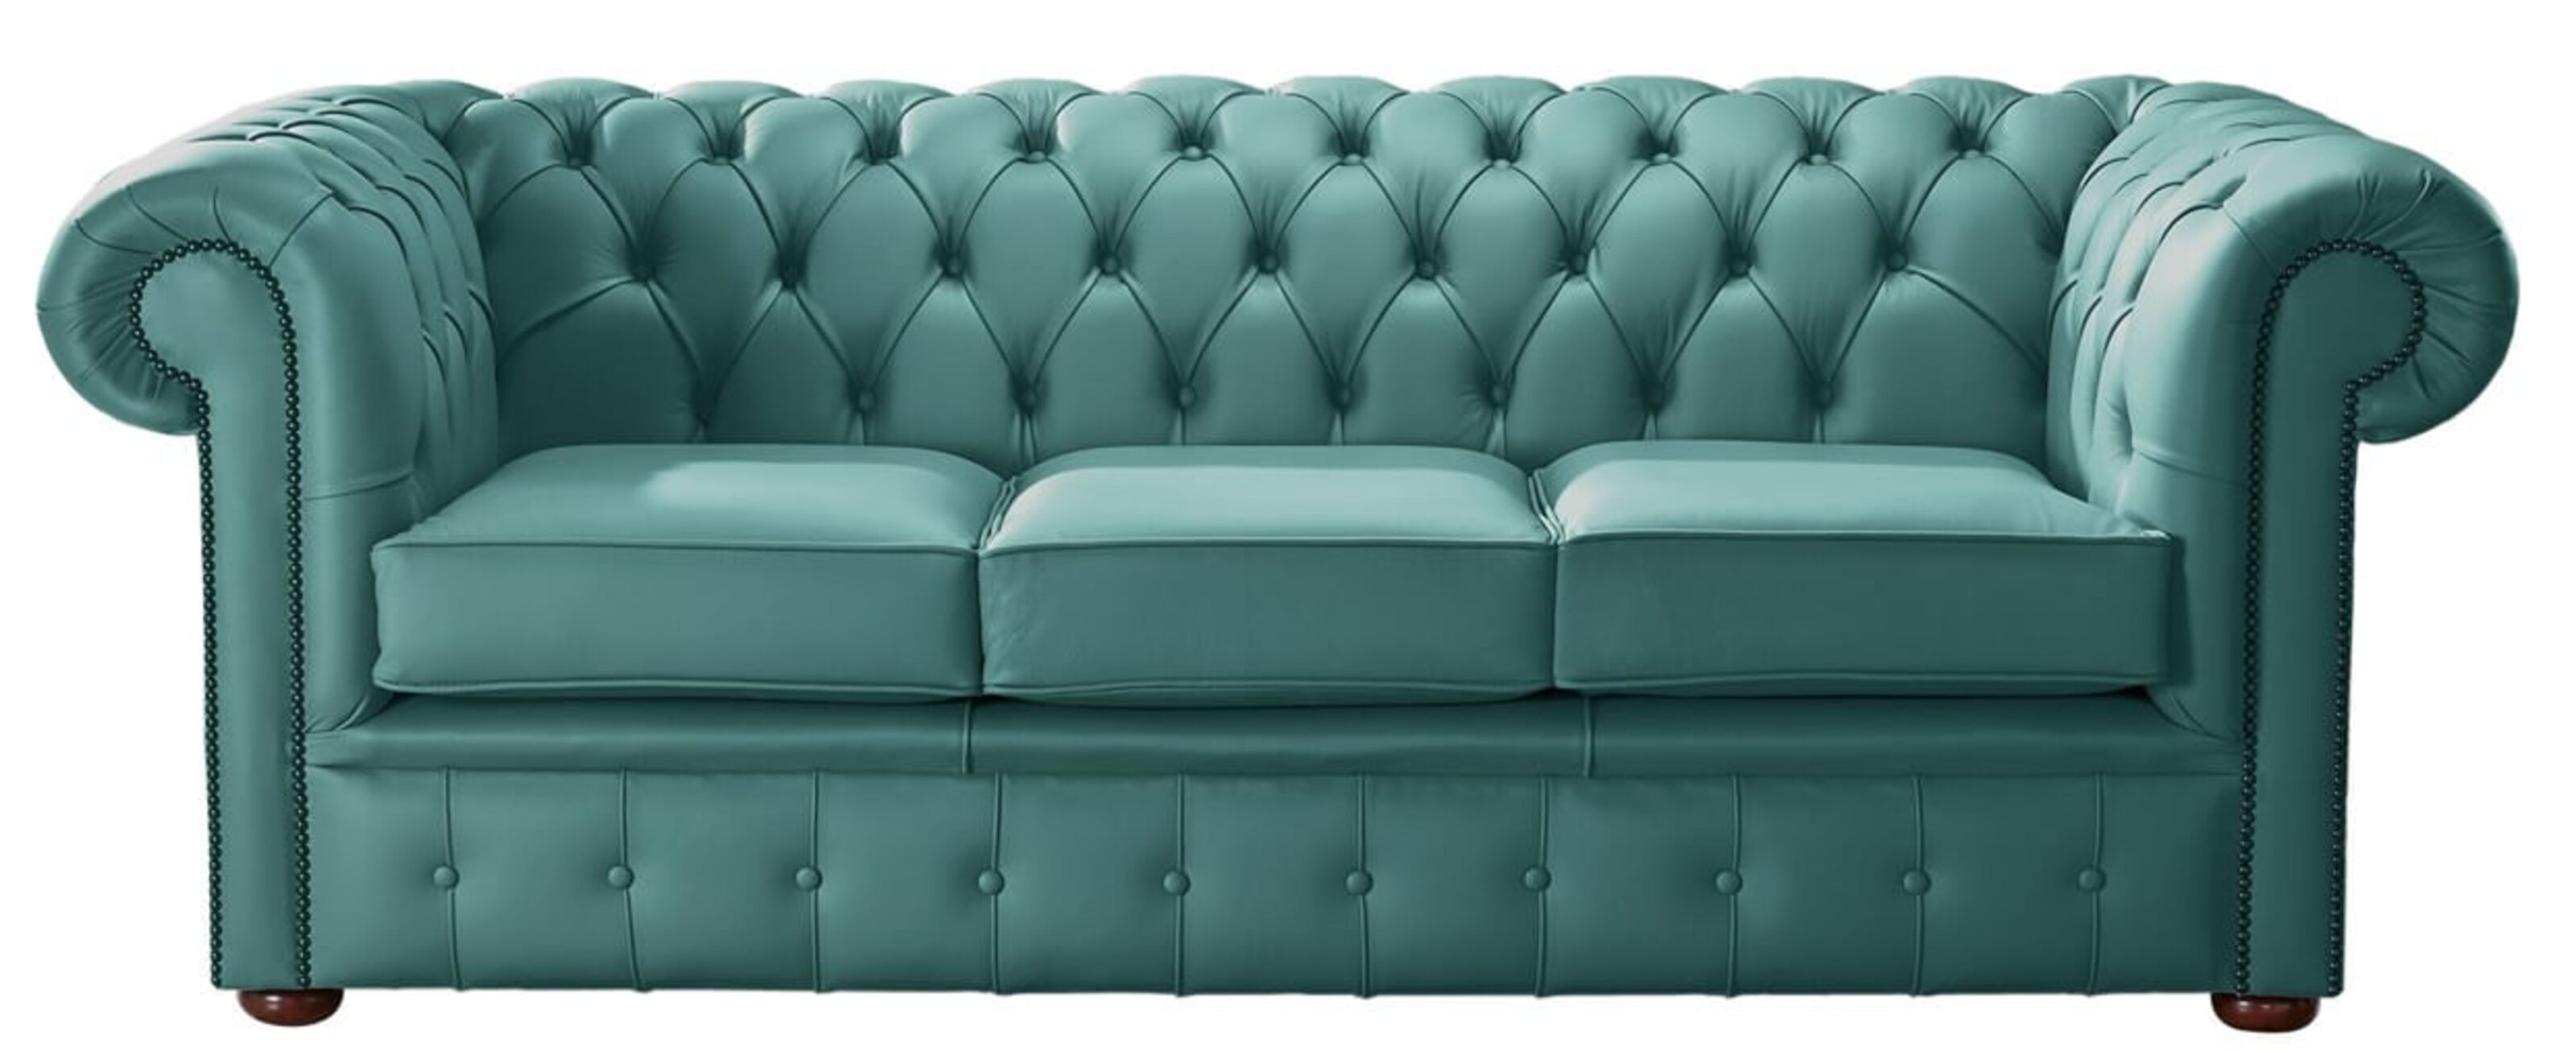 teal leather sofa with silver nailheads